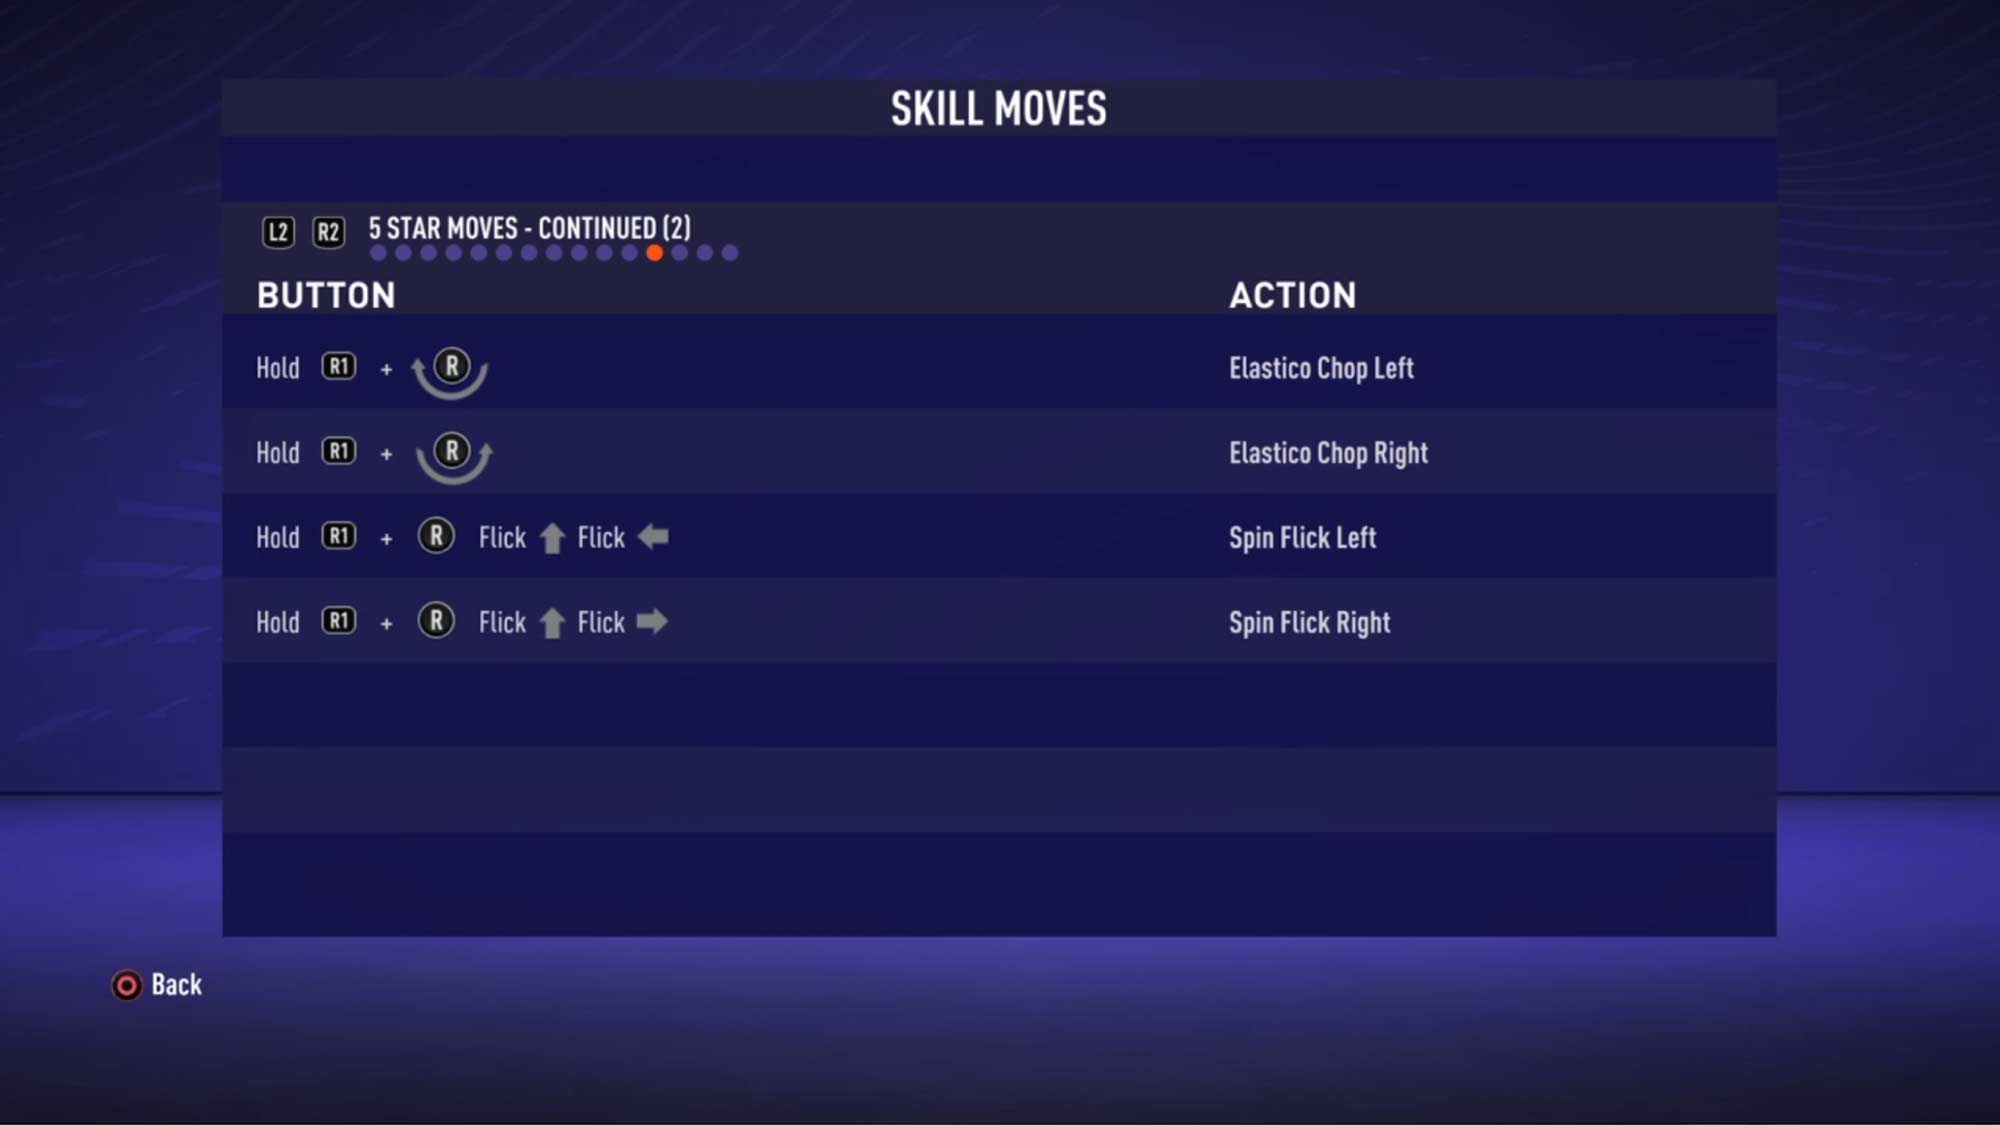 FIFA 21 Skill Moves Guide for PlayStation, Xbox and PC